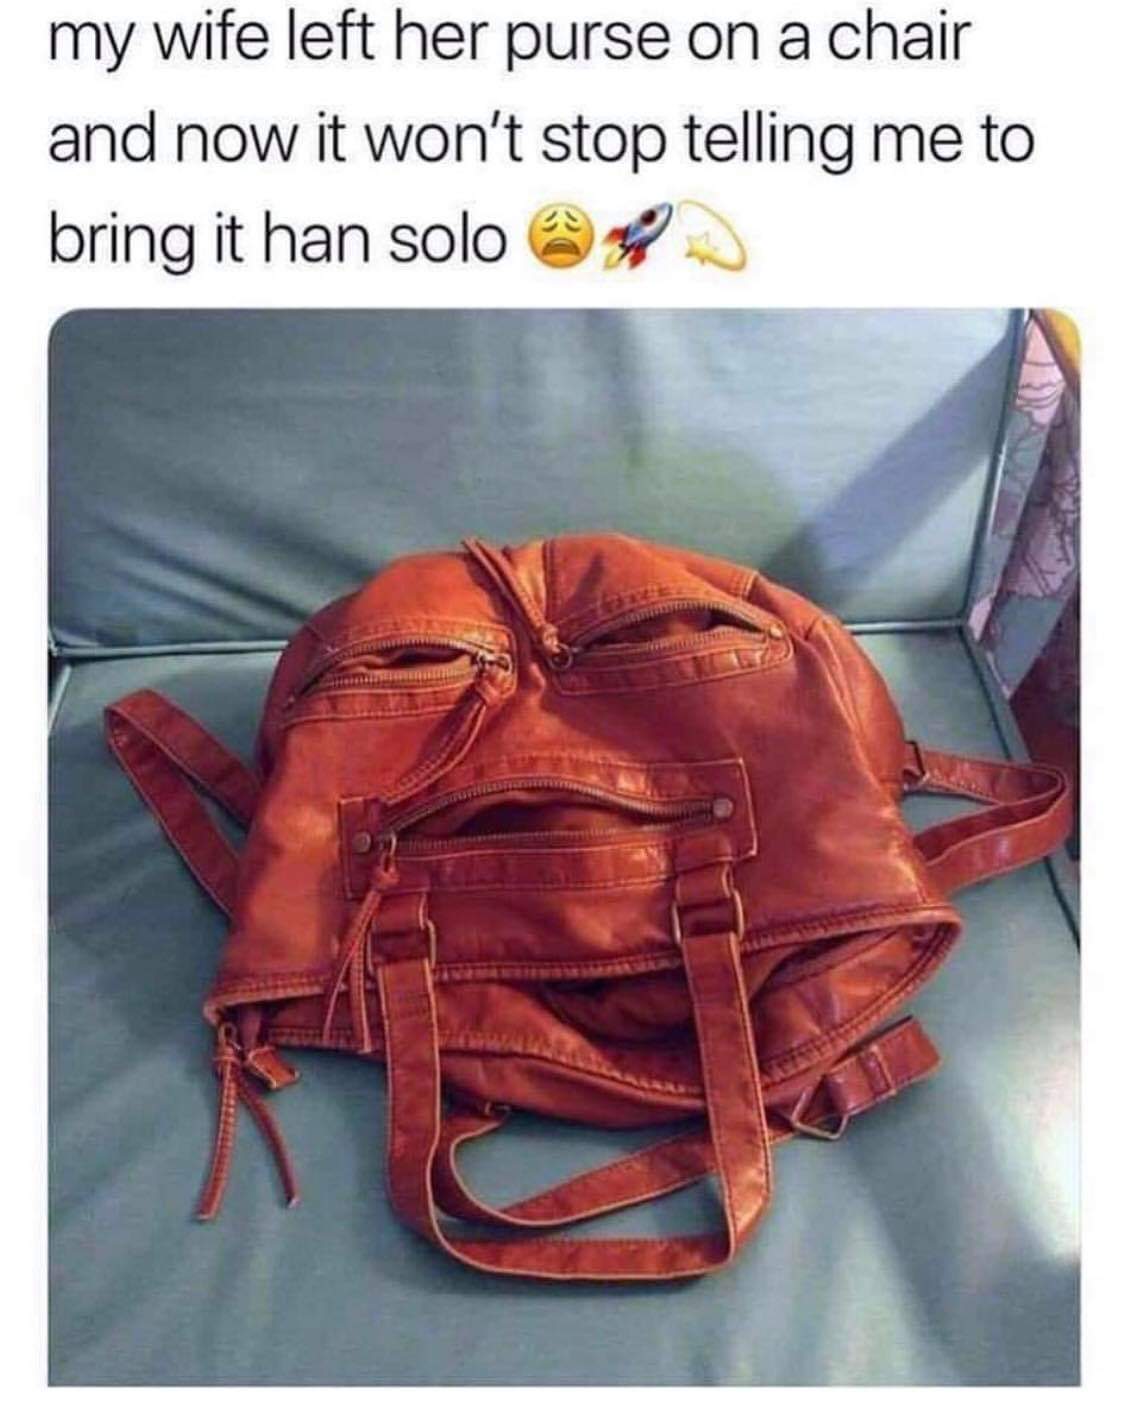 bring me han solo - my wife left her purse on a chair and now it won't stop telling me to bring it han solo @